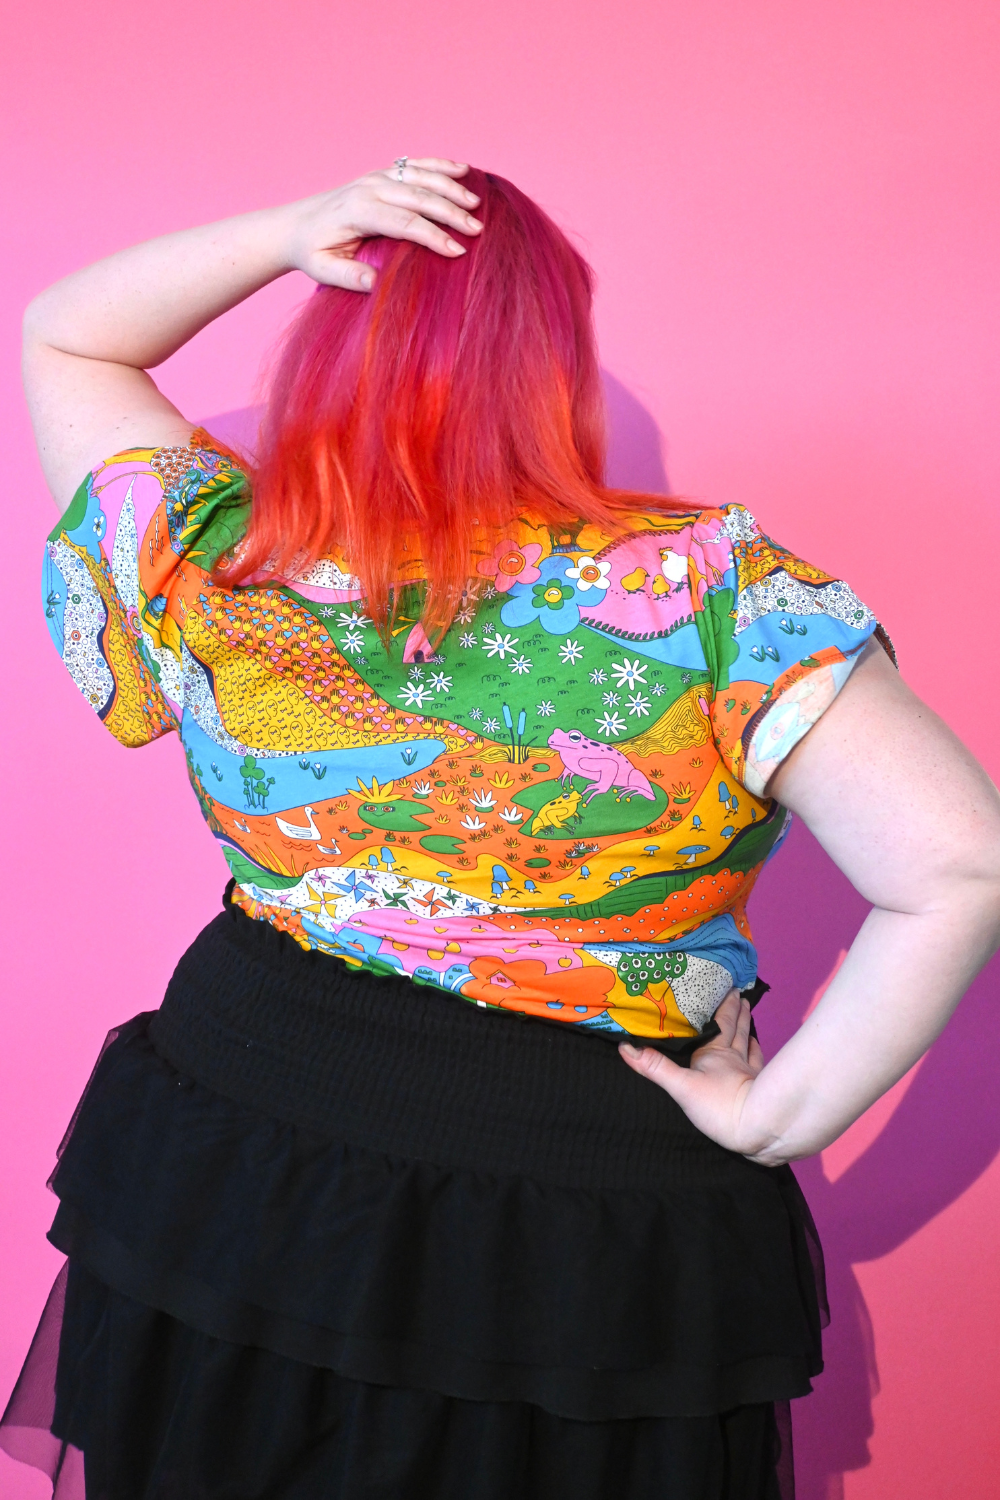 Back view of pink haired model wearing shirt with landscape graphic in multicolor